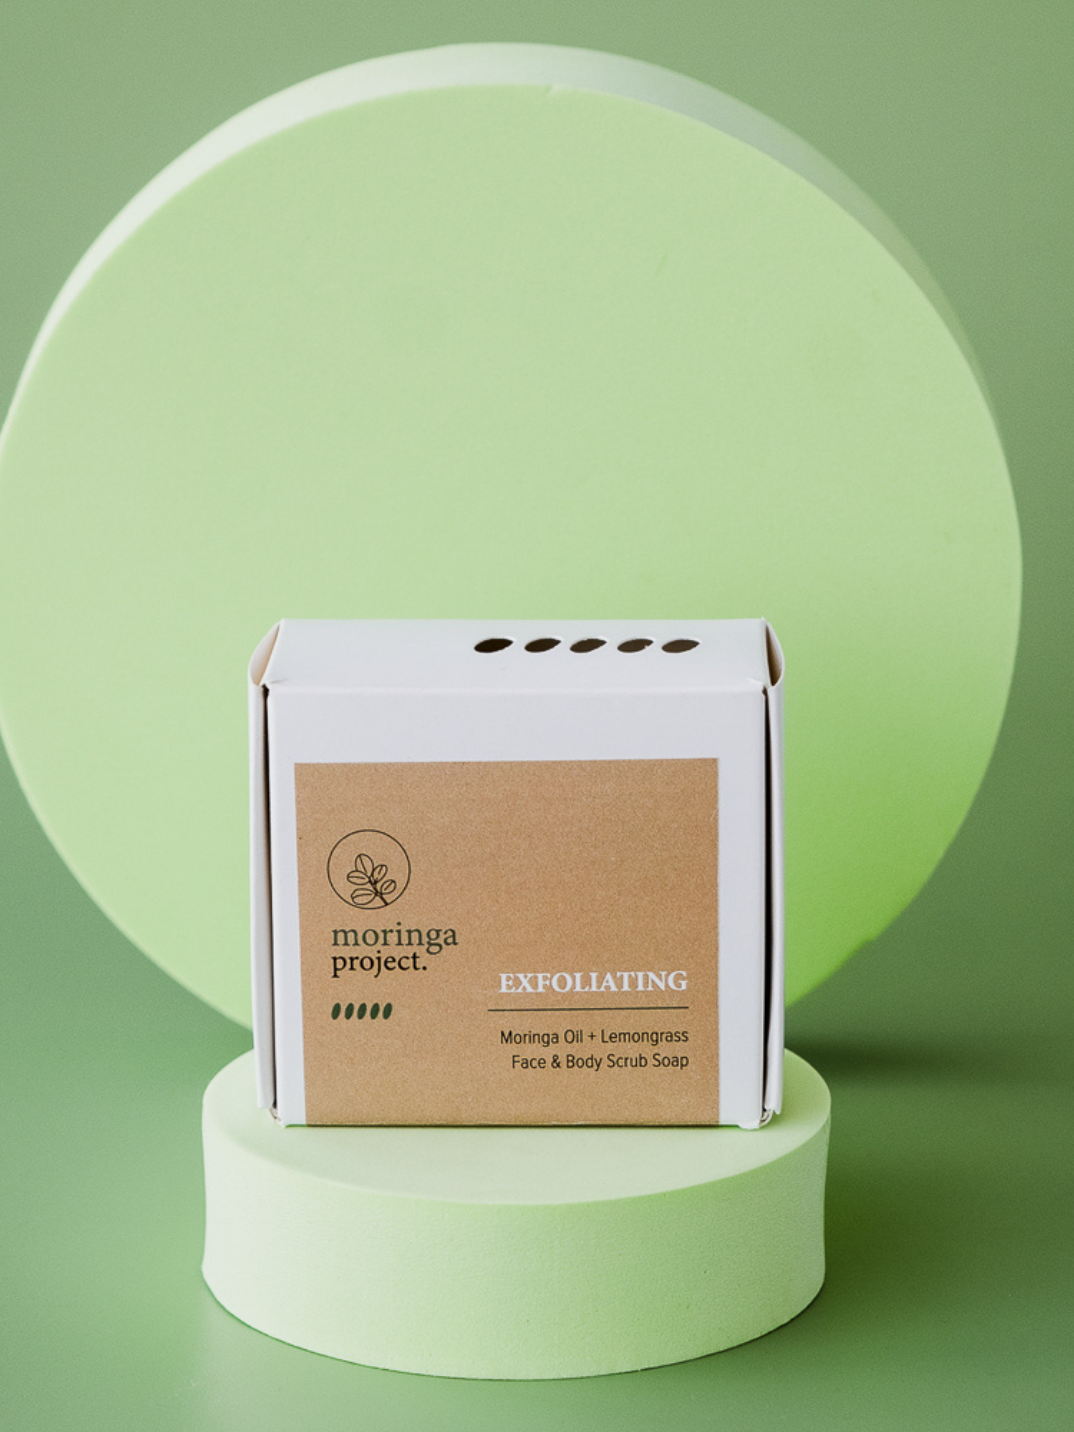 Handmade natural soap. Made with our own farmed moringa oil, moringa powder and moringa seed scrub, this soap is for exfoliating your skin and is packed with antioxidants from the moringa. Shop now.